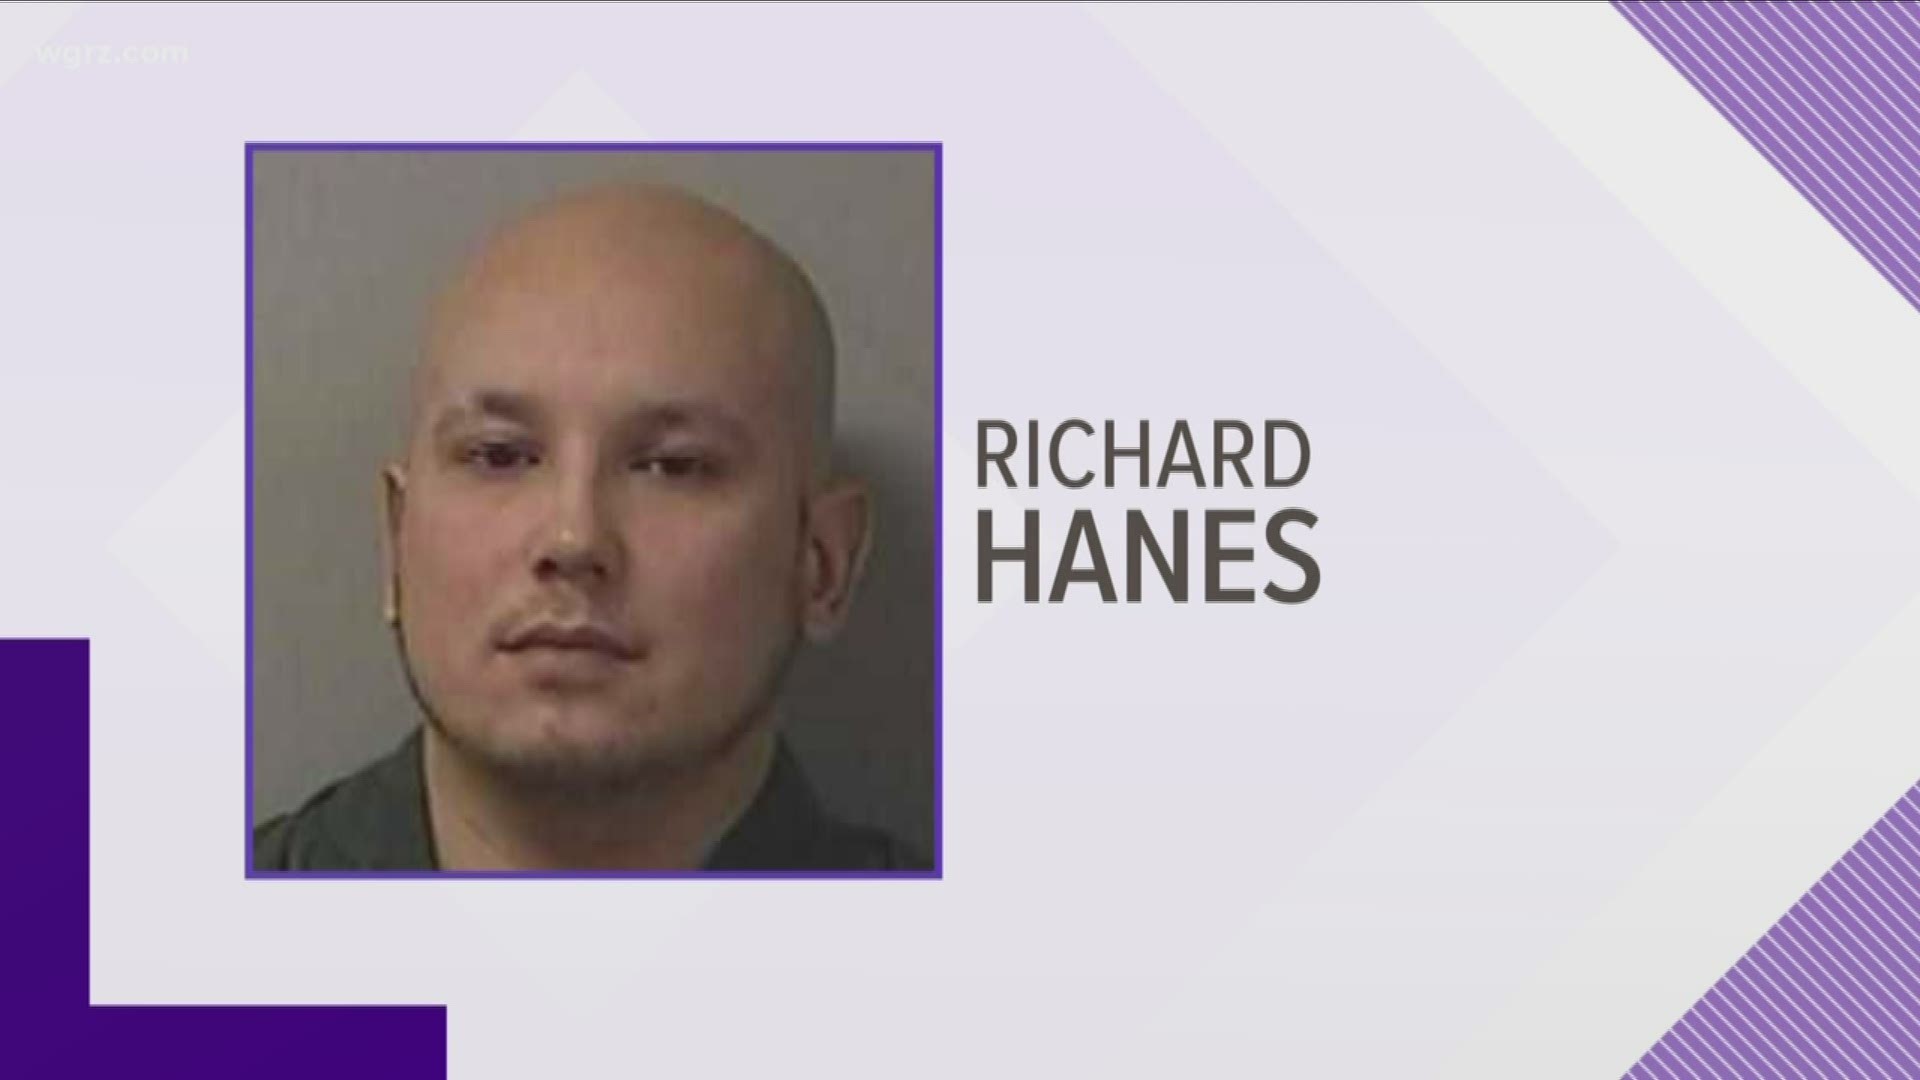 36-year-old Richard Hanes was found guilty of beating Raymond Morgan to death with a hammer in Morgan's home on Liberty Avenue just over a year ago.